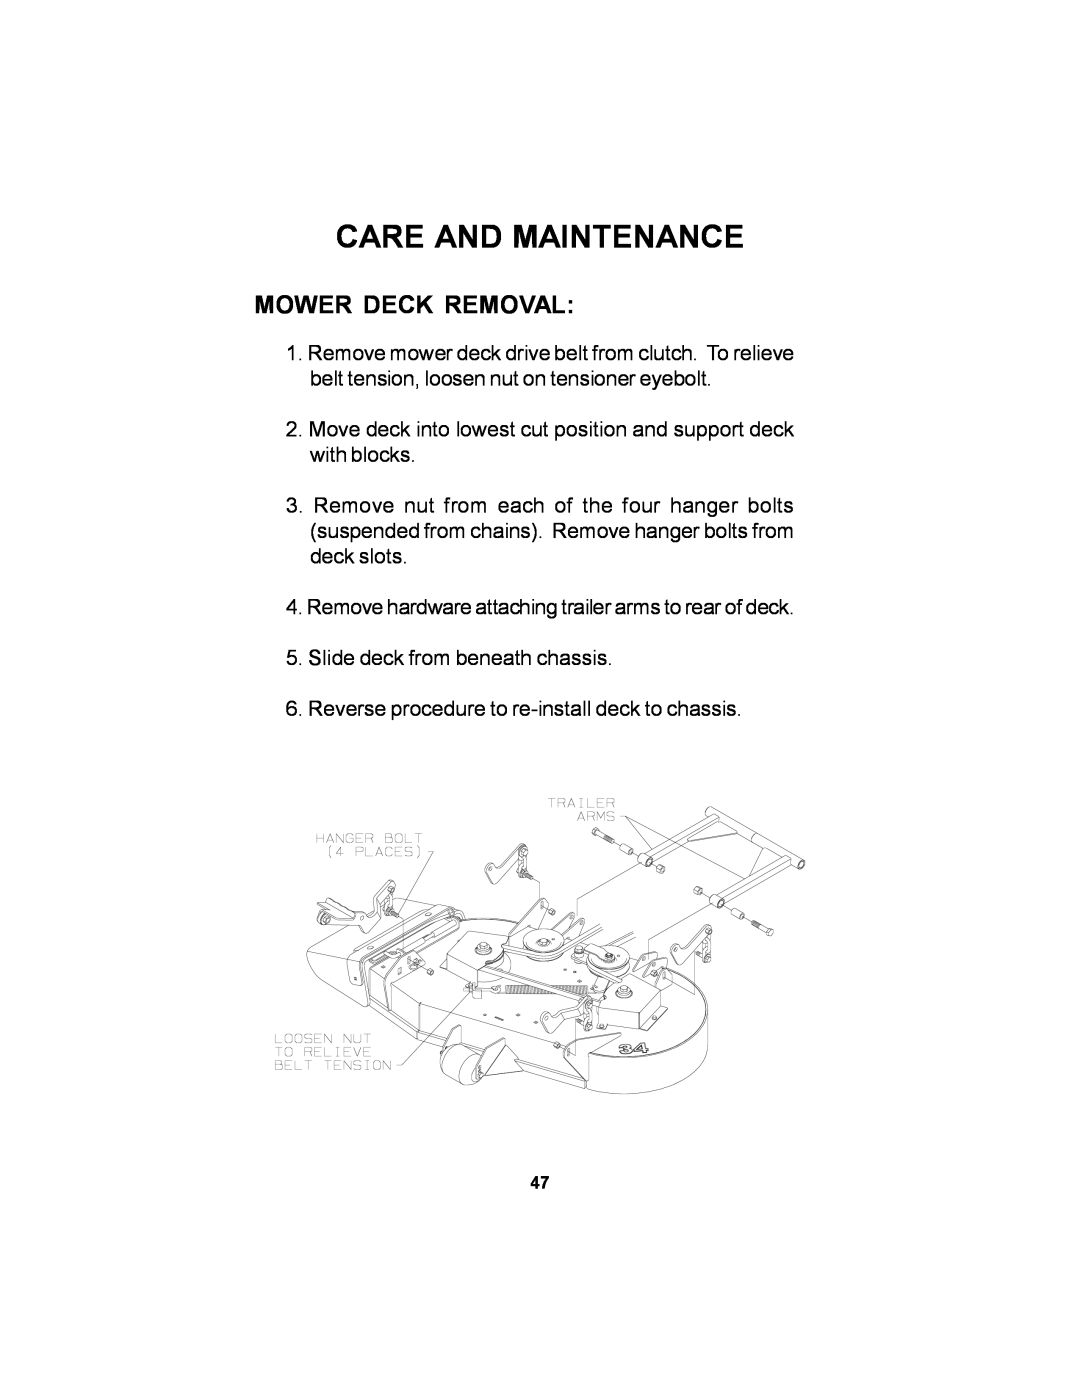 Dixon 11249-106 manual Mower Deck Removal, Care And Maintenance 